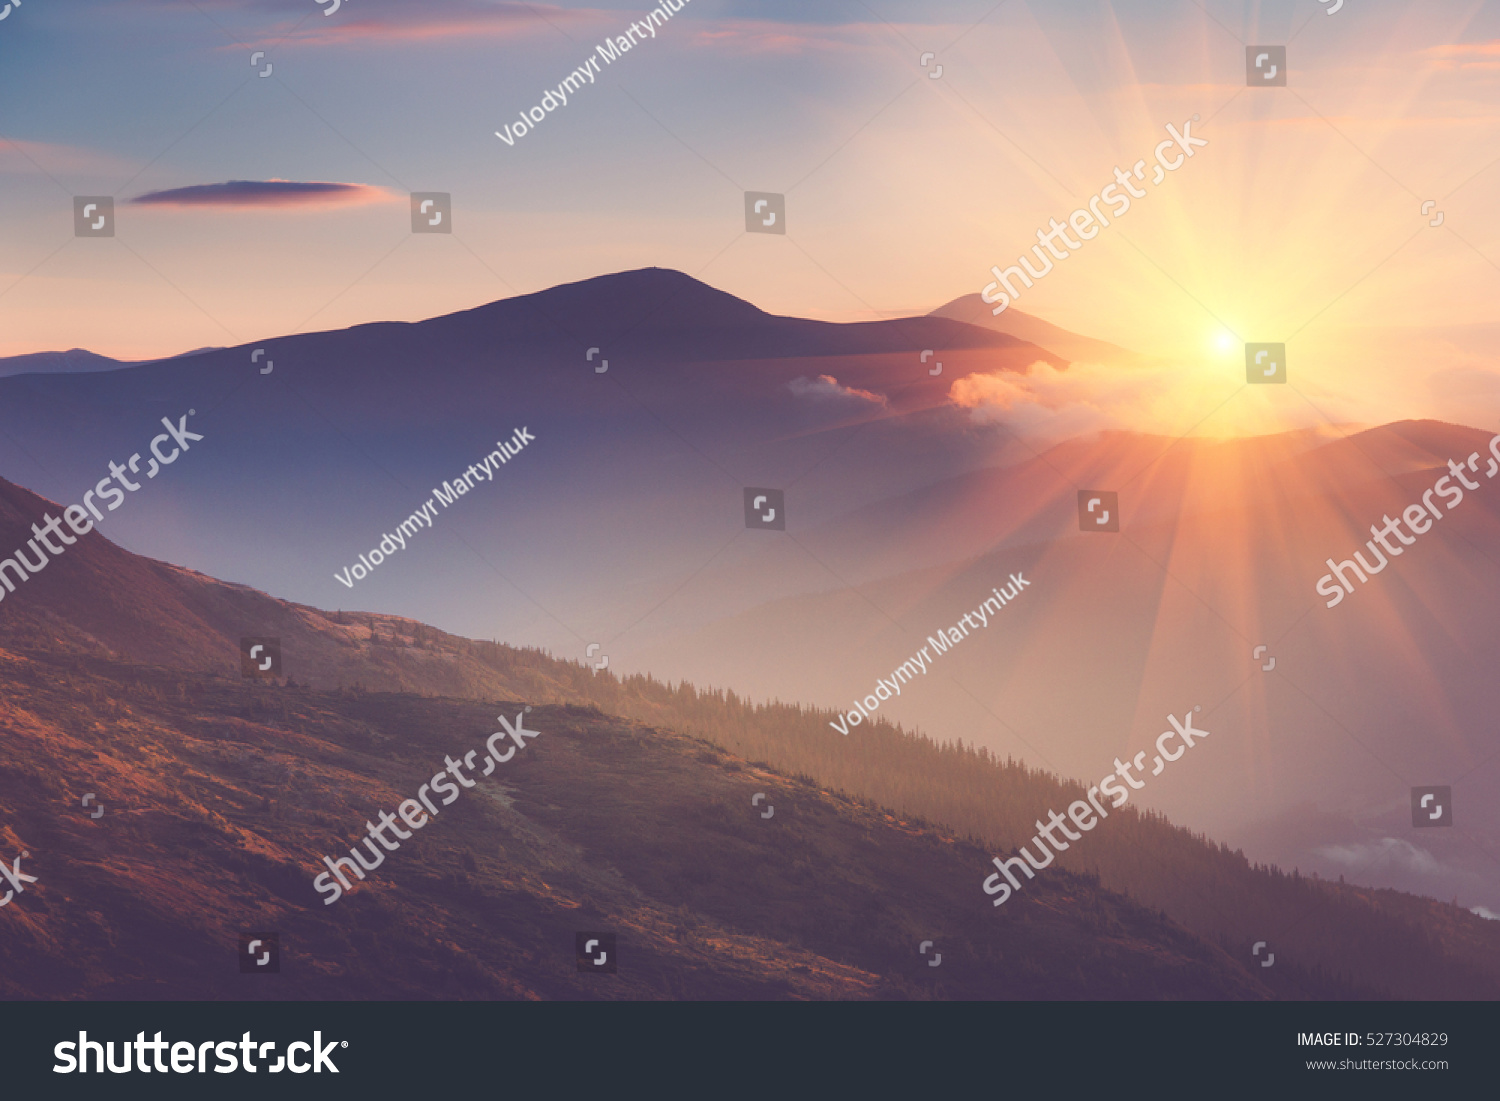 Beautiful landscape in the mountains at sunrise. View of foggy hills covered by forest. Filtered image:cross processed retro effect.  #527304829